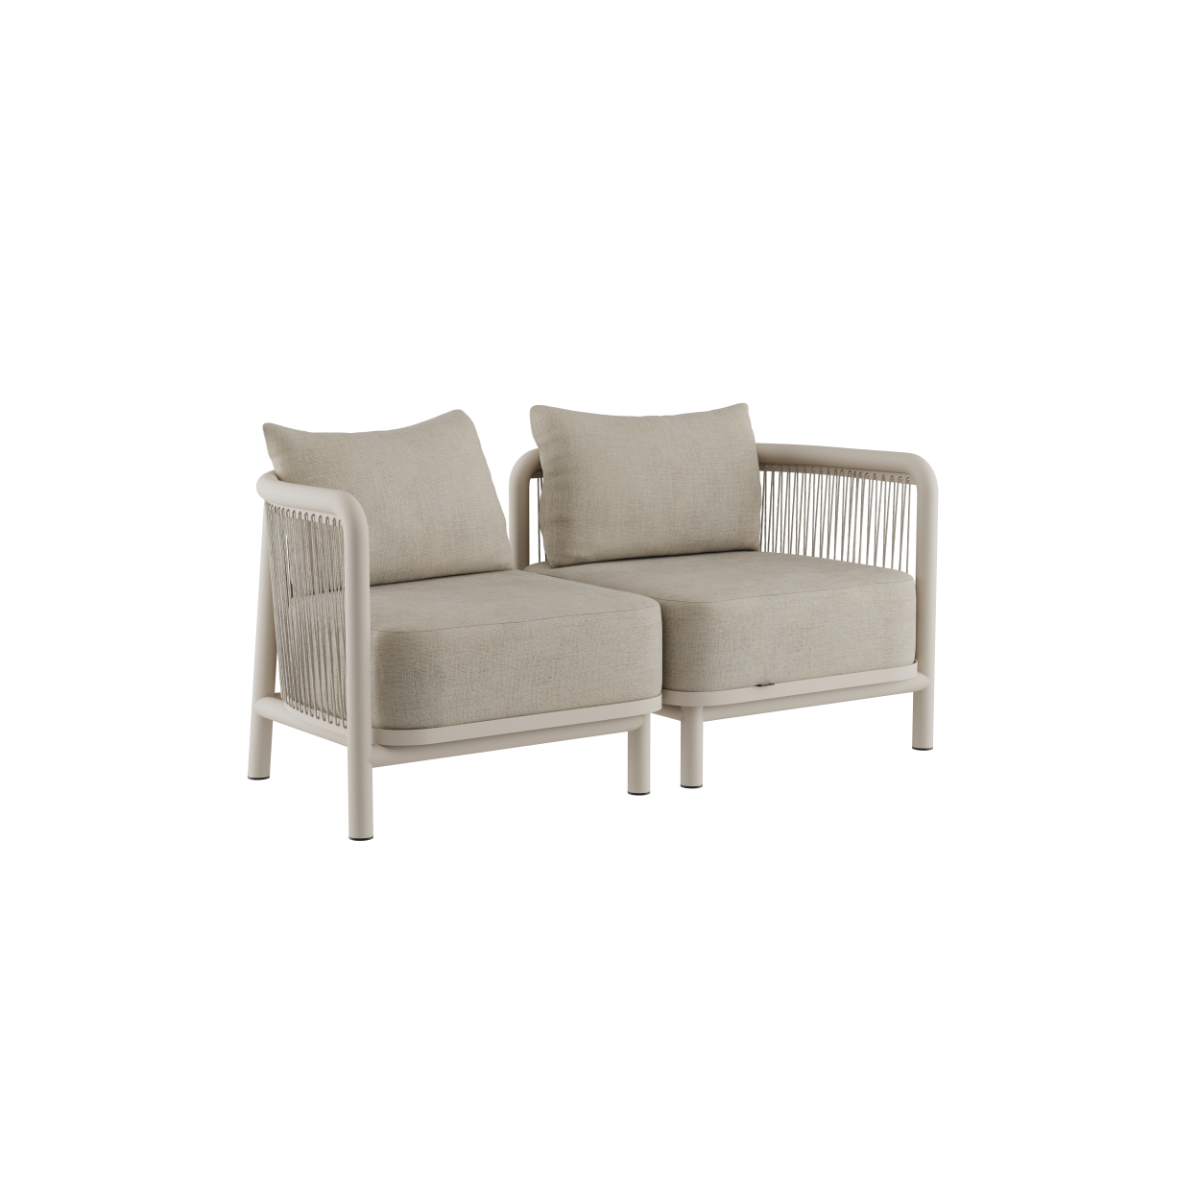 String Lounge Sofa - 2 seater [Contract]